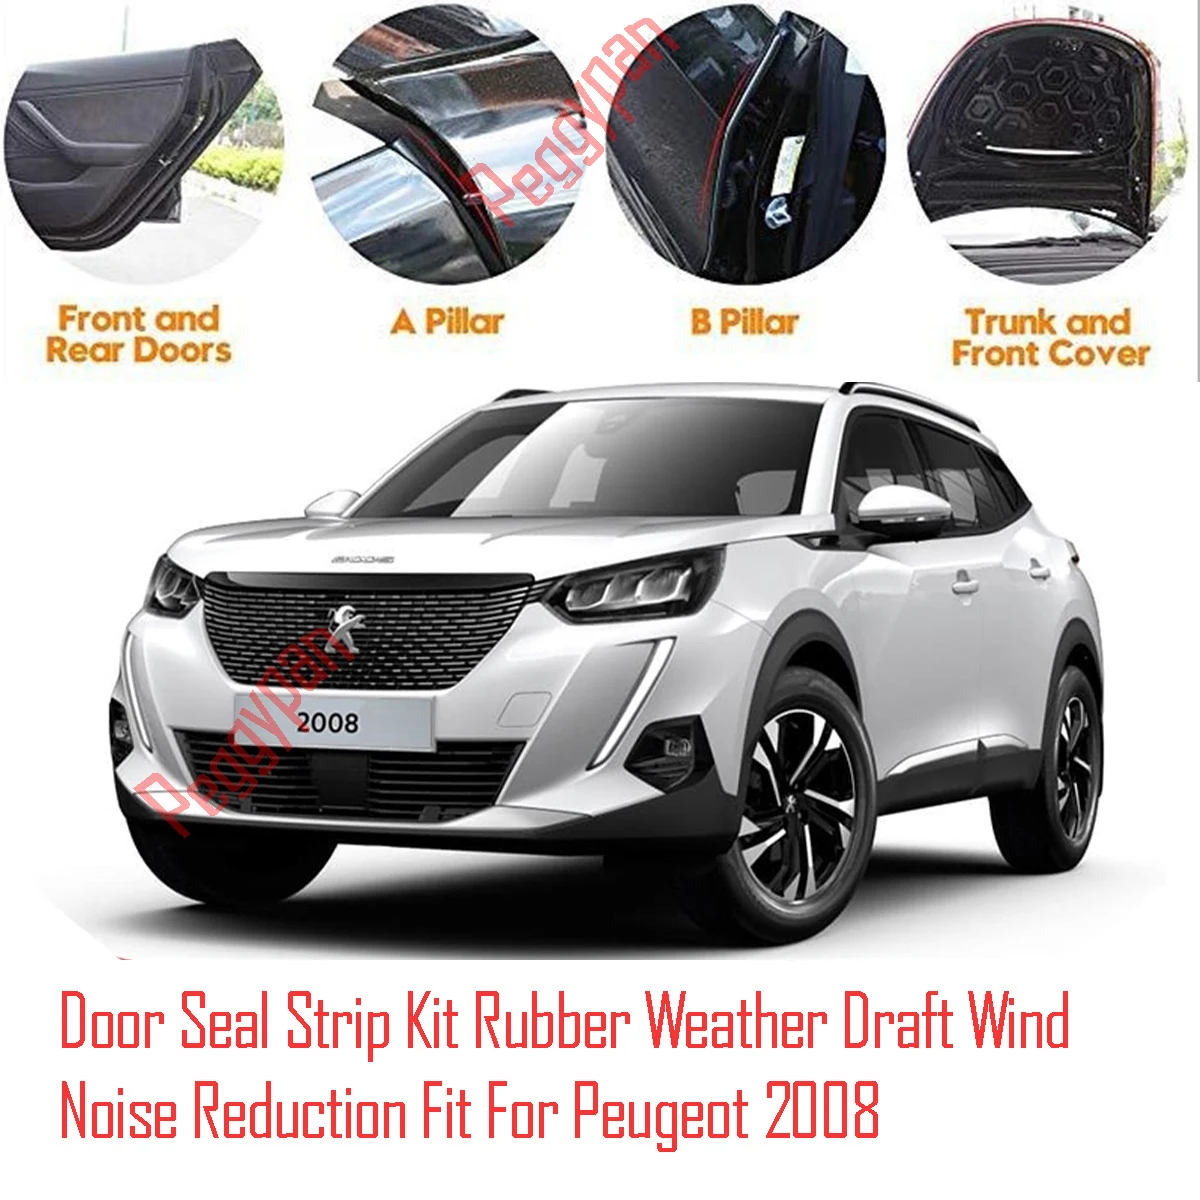 Door Seal Strip Kit Self Adhesive Window Engine Cover Soundproof Rubber Weather Draft Wind Noise Reduction Fit For Peugeot 2008